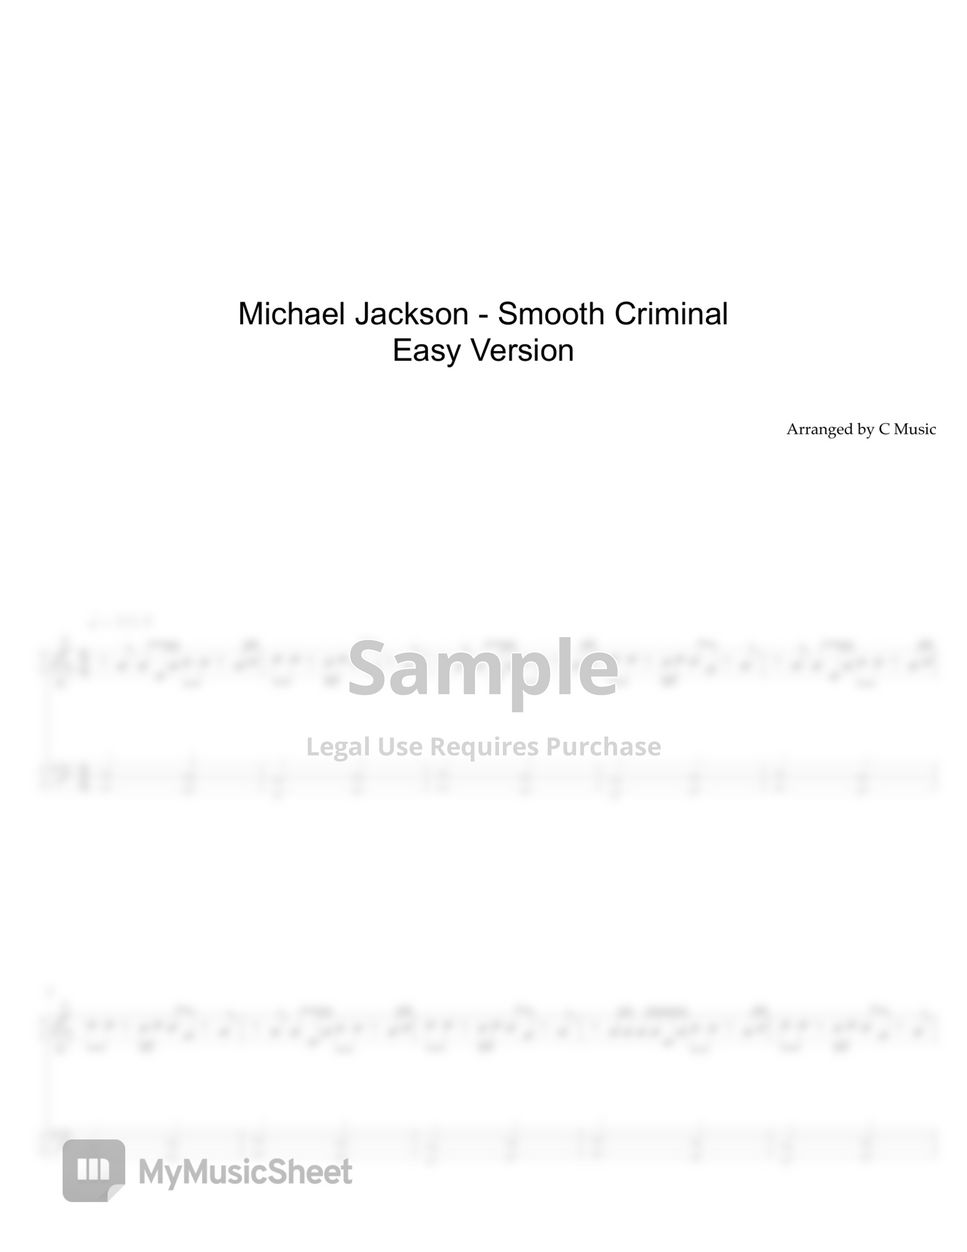 Michael Jackson - Smooth Criminal (Easy Version) by C Music